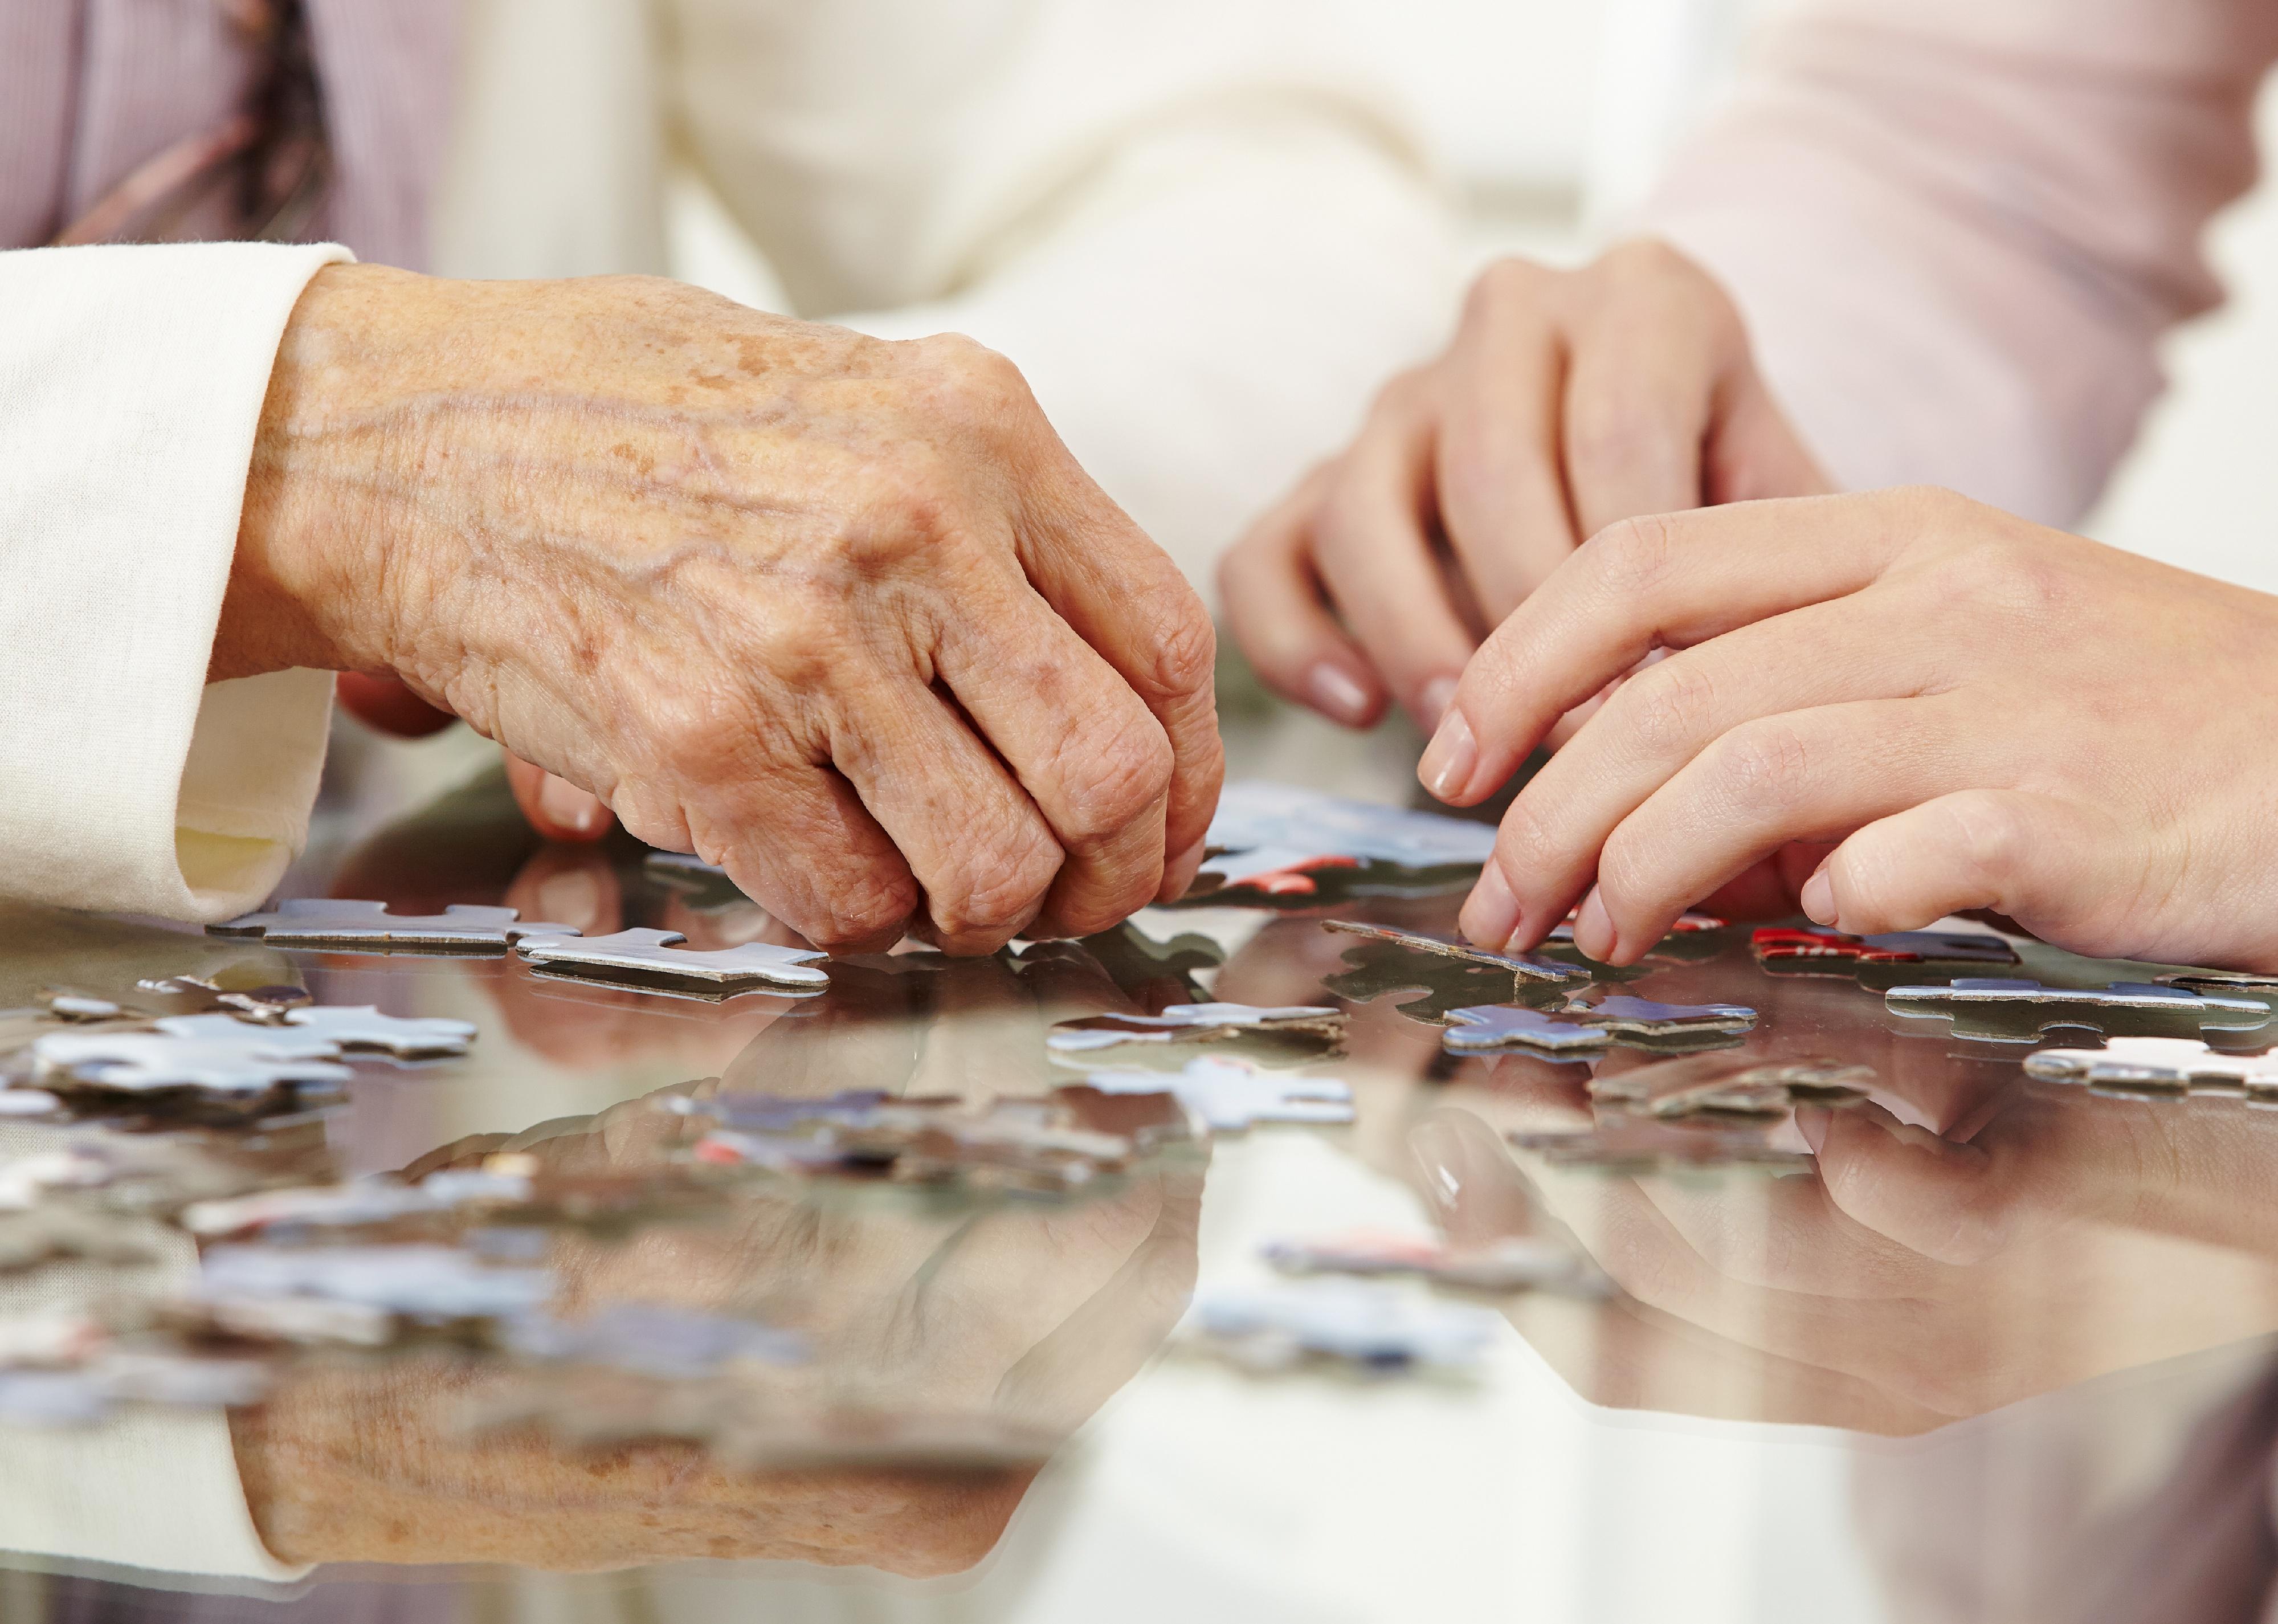 Elderly hands and younger hands solving a jigsaw puzzle together.